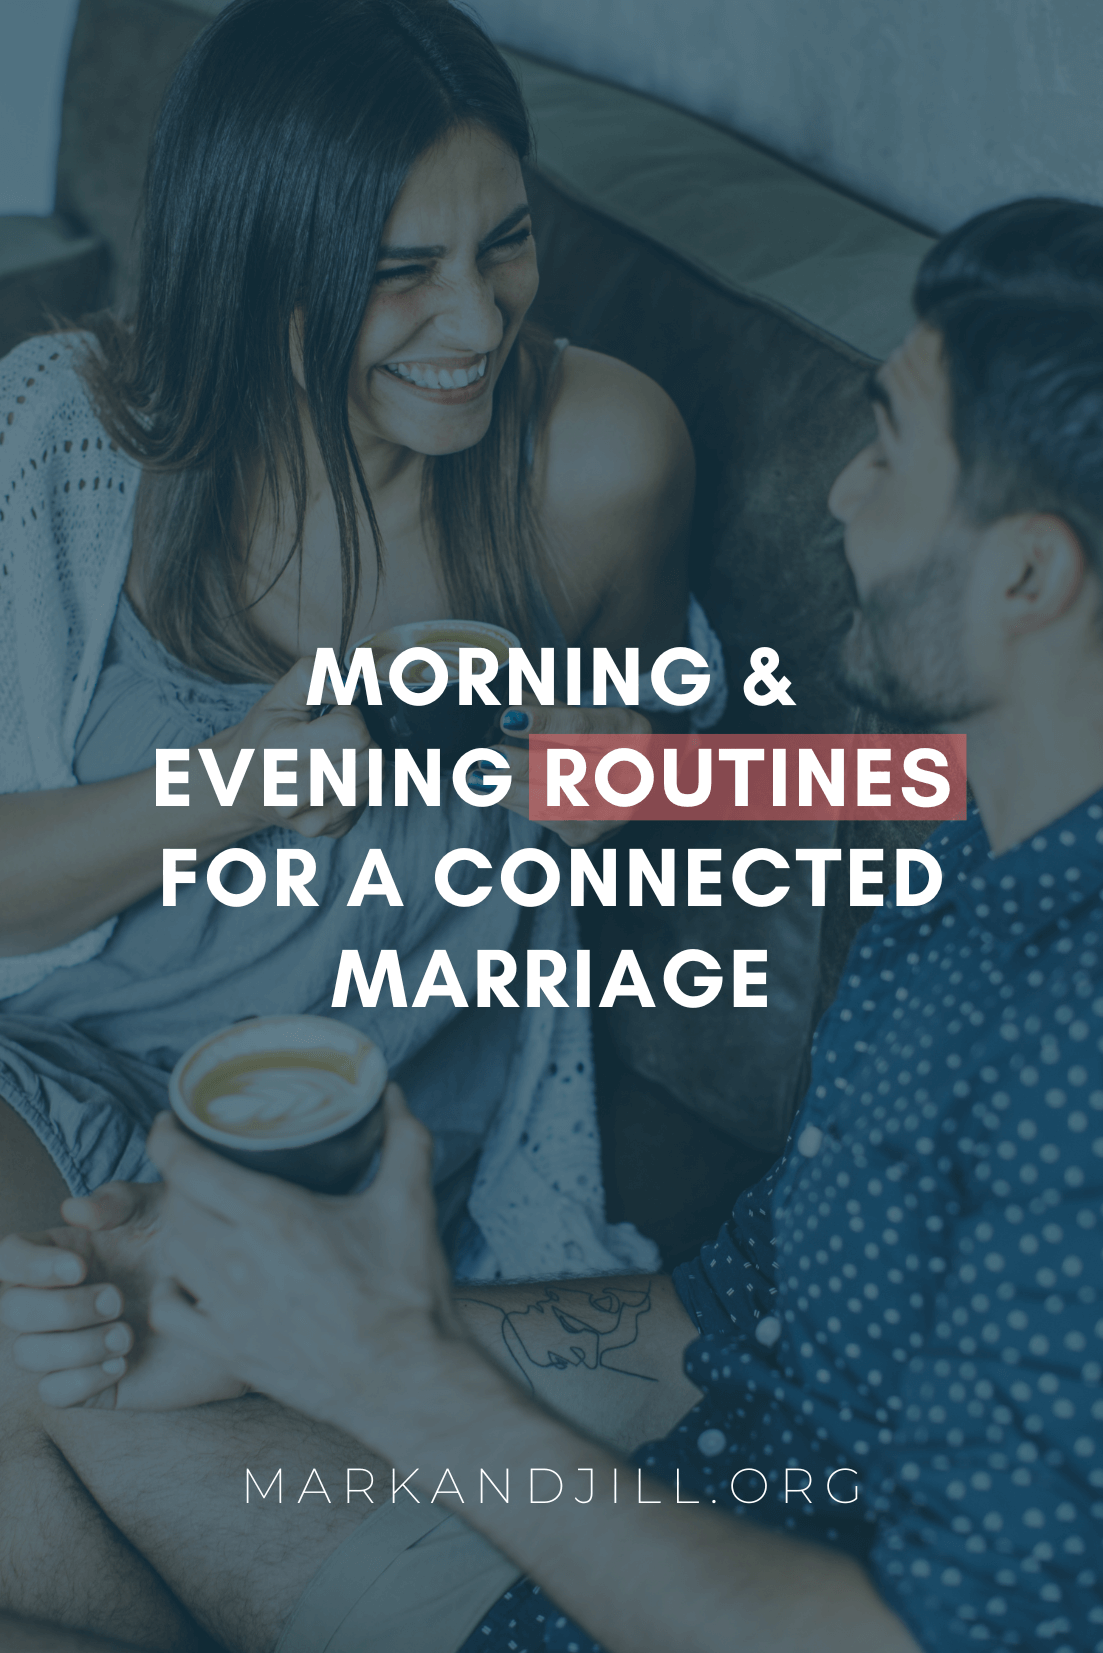 Morning & Evening Routines for a Connected Marriage | #MarriageMonday